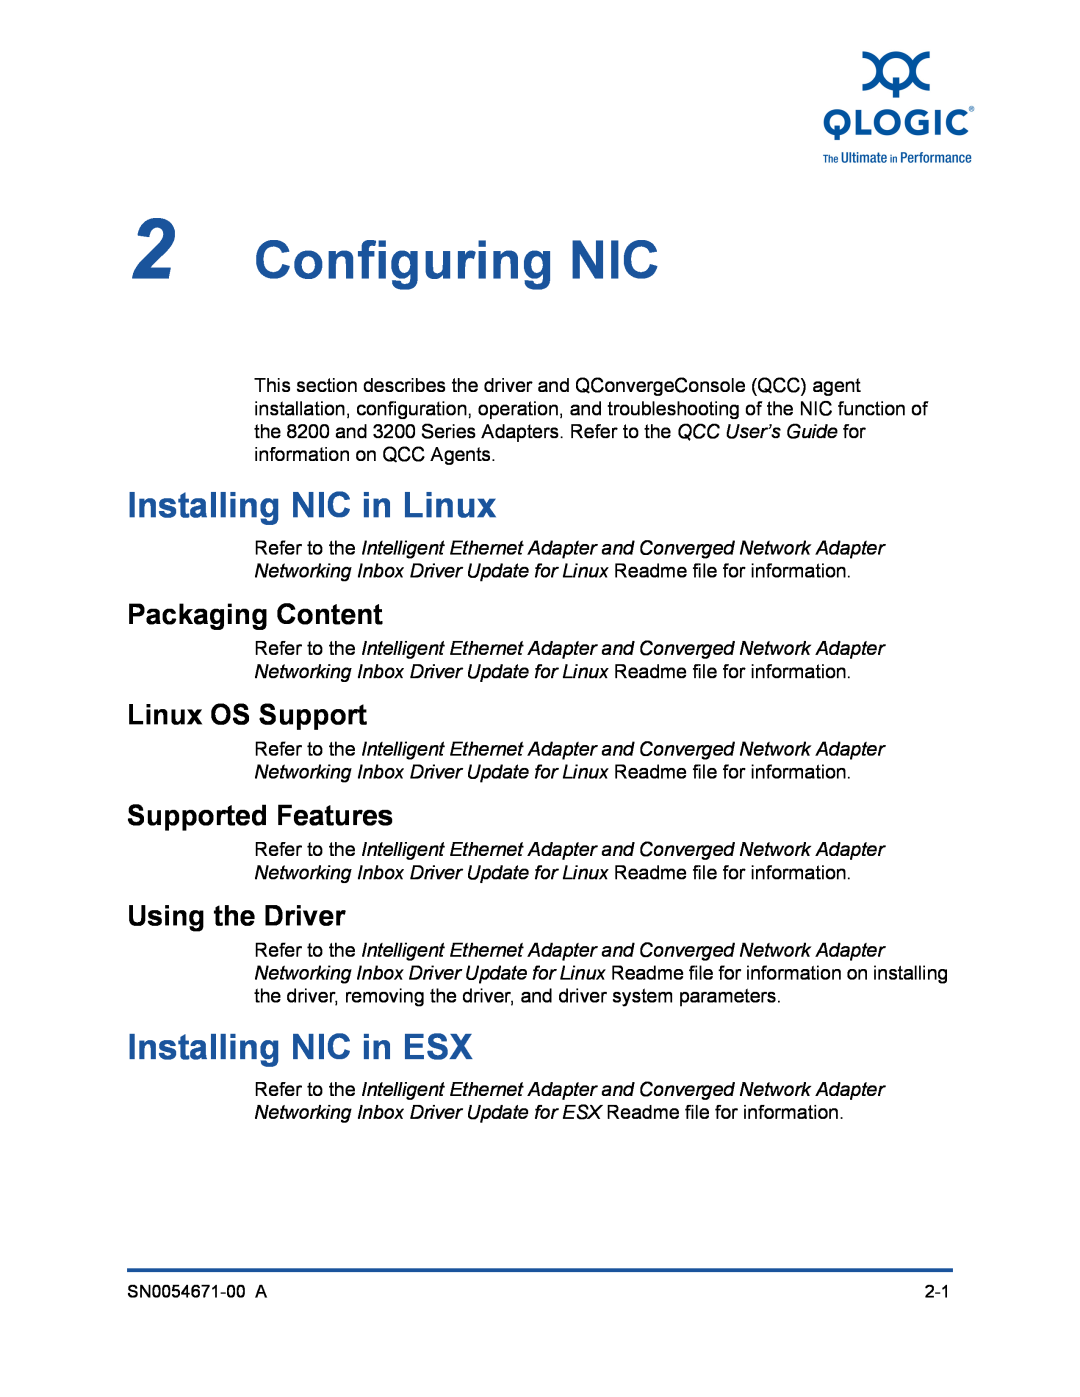 Q-Logic 3200, 8200 Configuring NIC, Installing NIC in Linux, Installing NIC in ESX, Packaging Content, Linux OS Support 